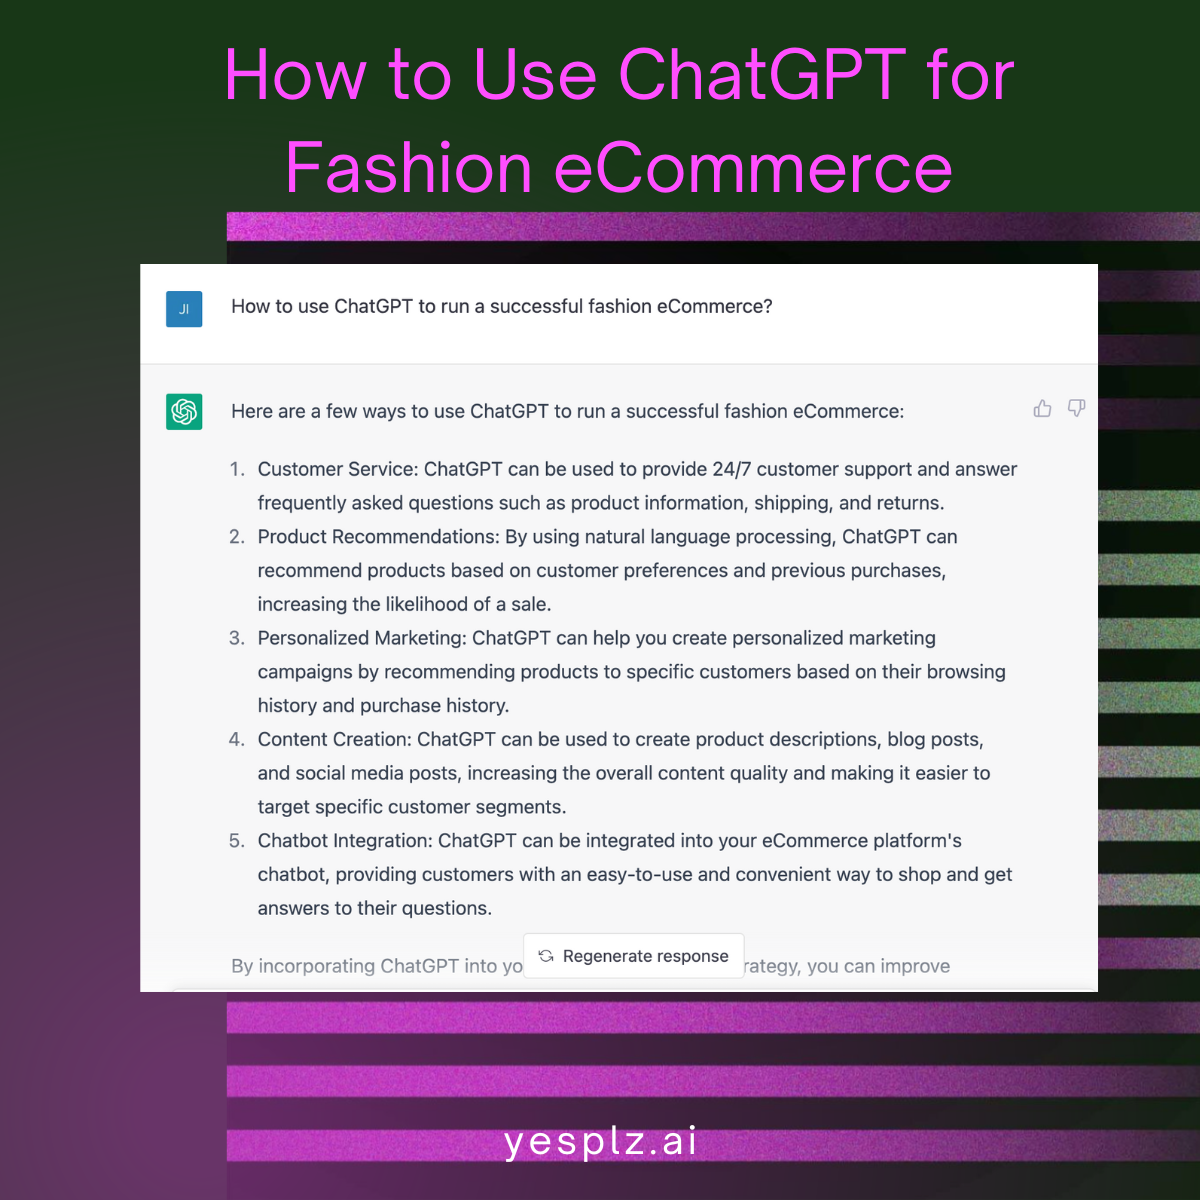 Ideas to use ChatGPT for fashion eCommerce